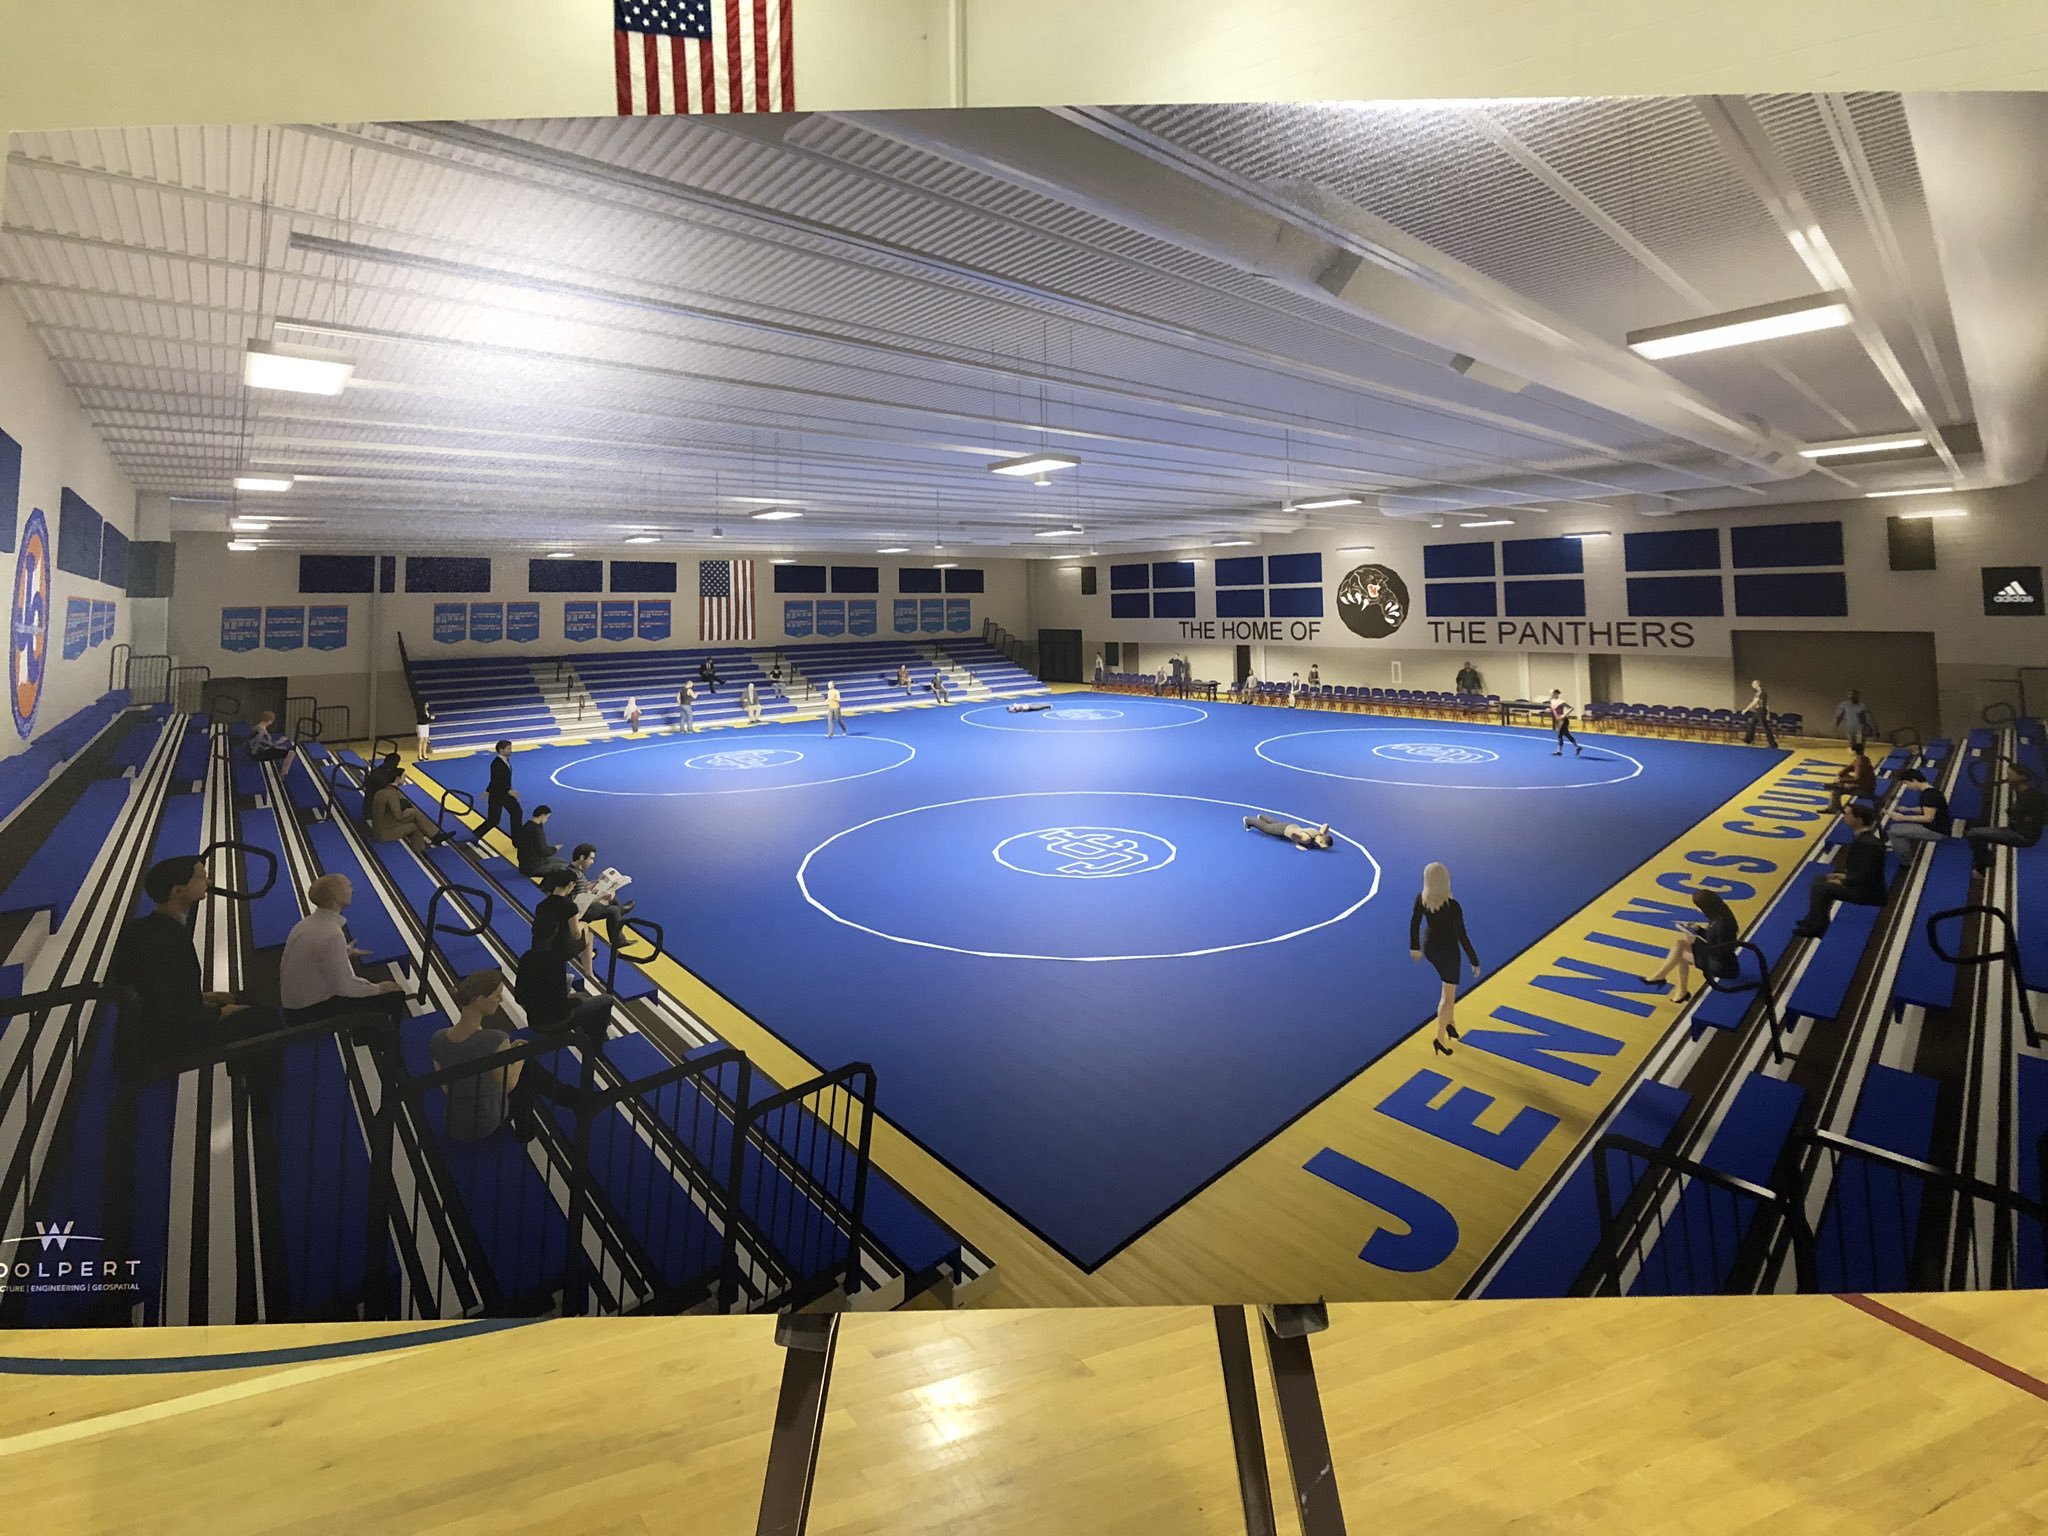 More information about "#WrestlingWednesday: Jennings County getting a major upgrade"